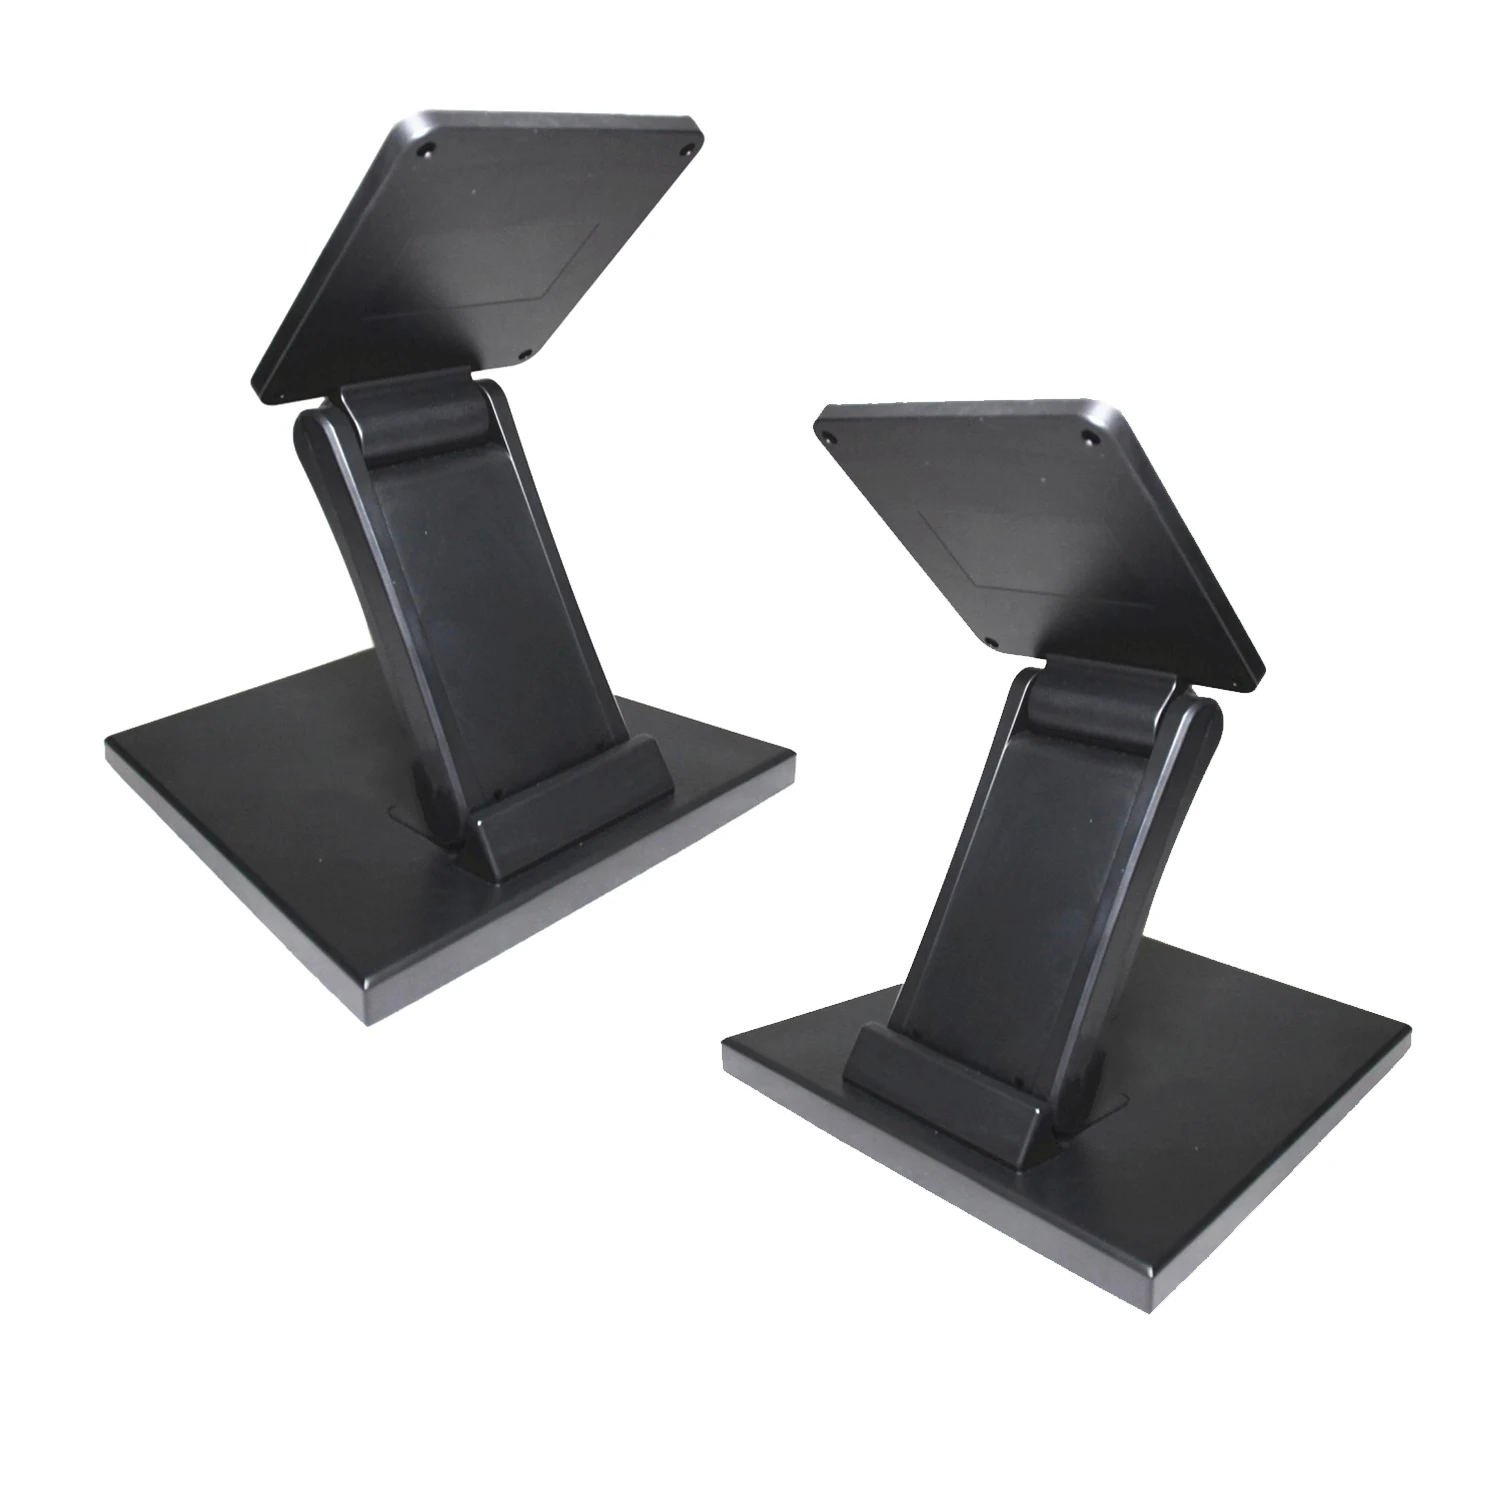 Industrial All-in-one Monitor Desktop Computer Folding Large Base Bracket Computer Stand